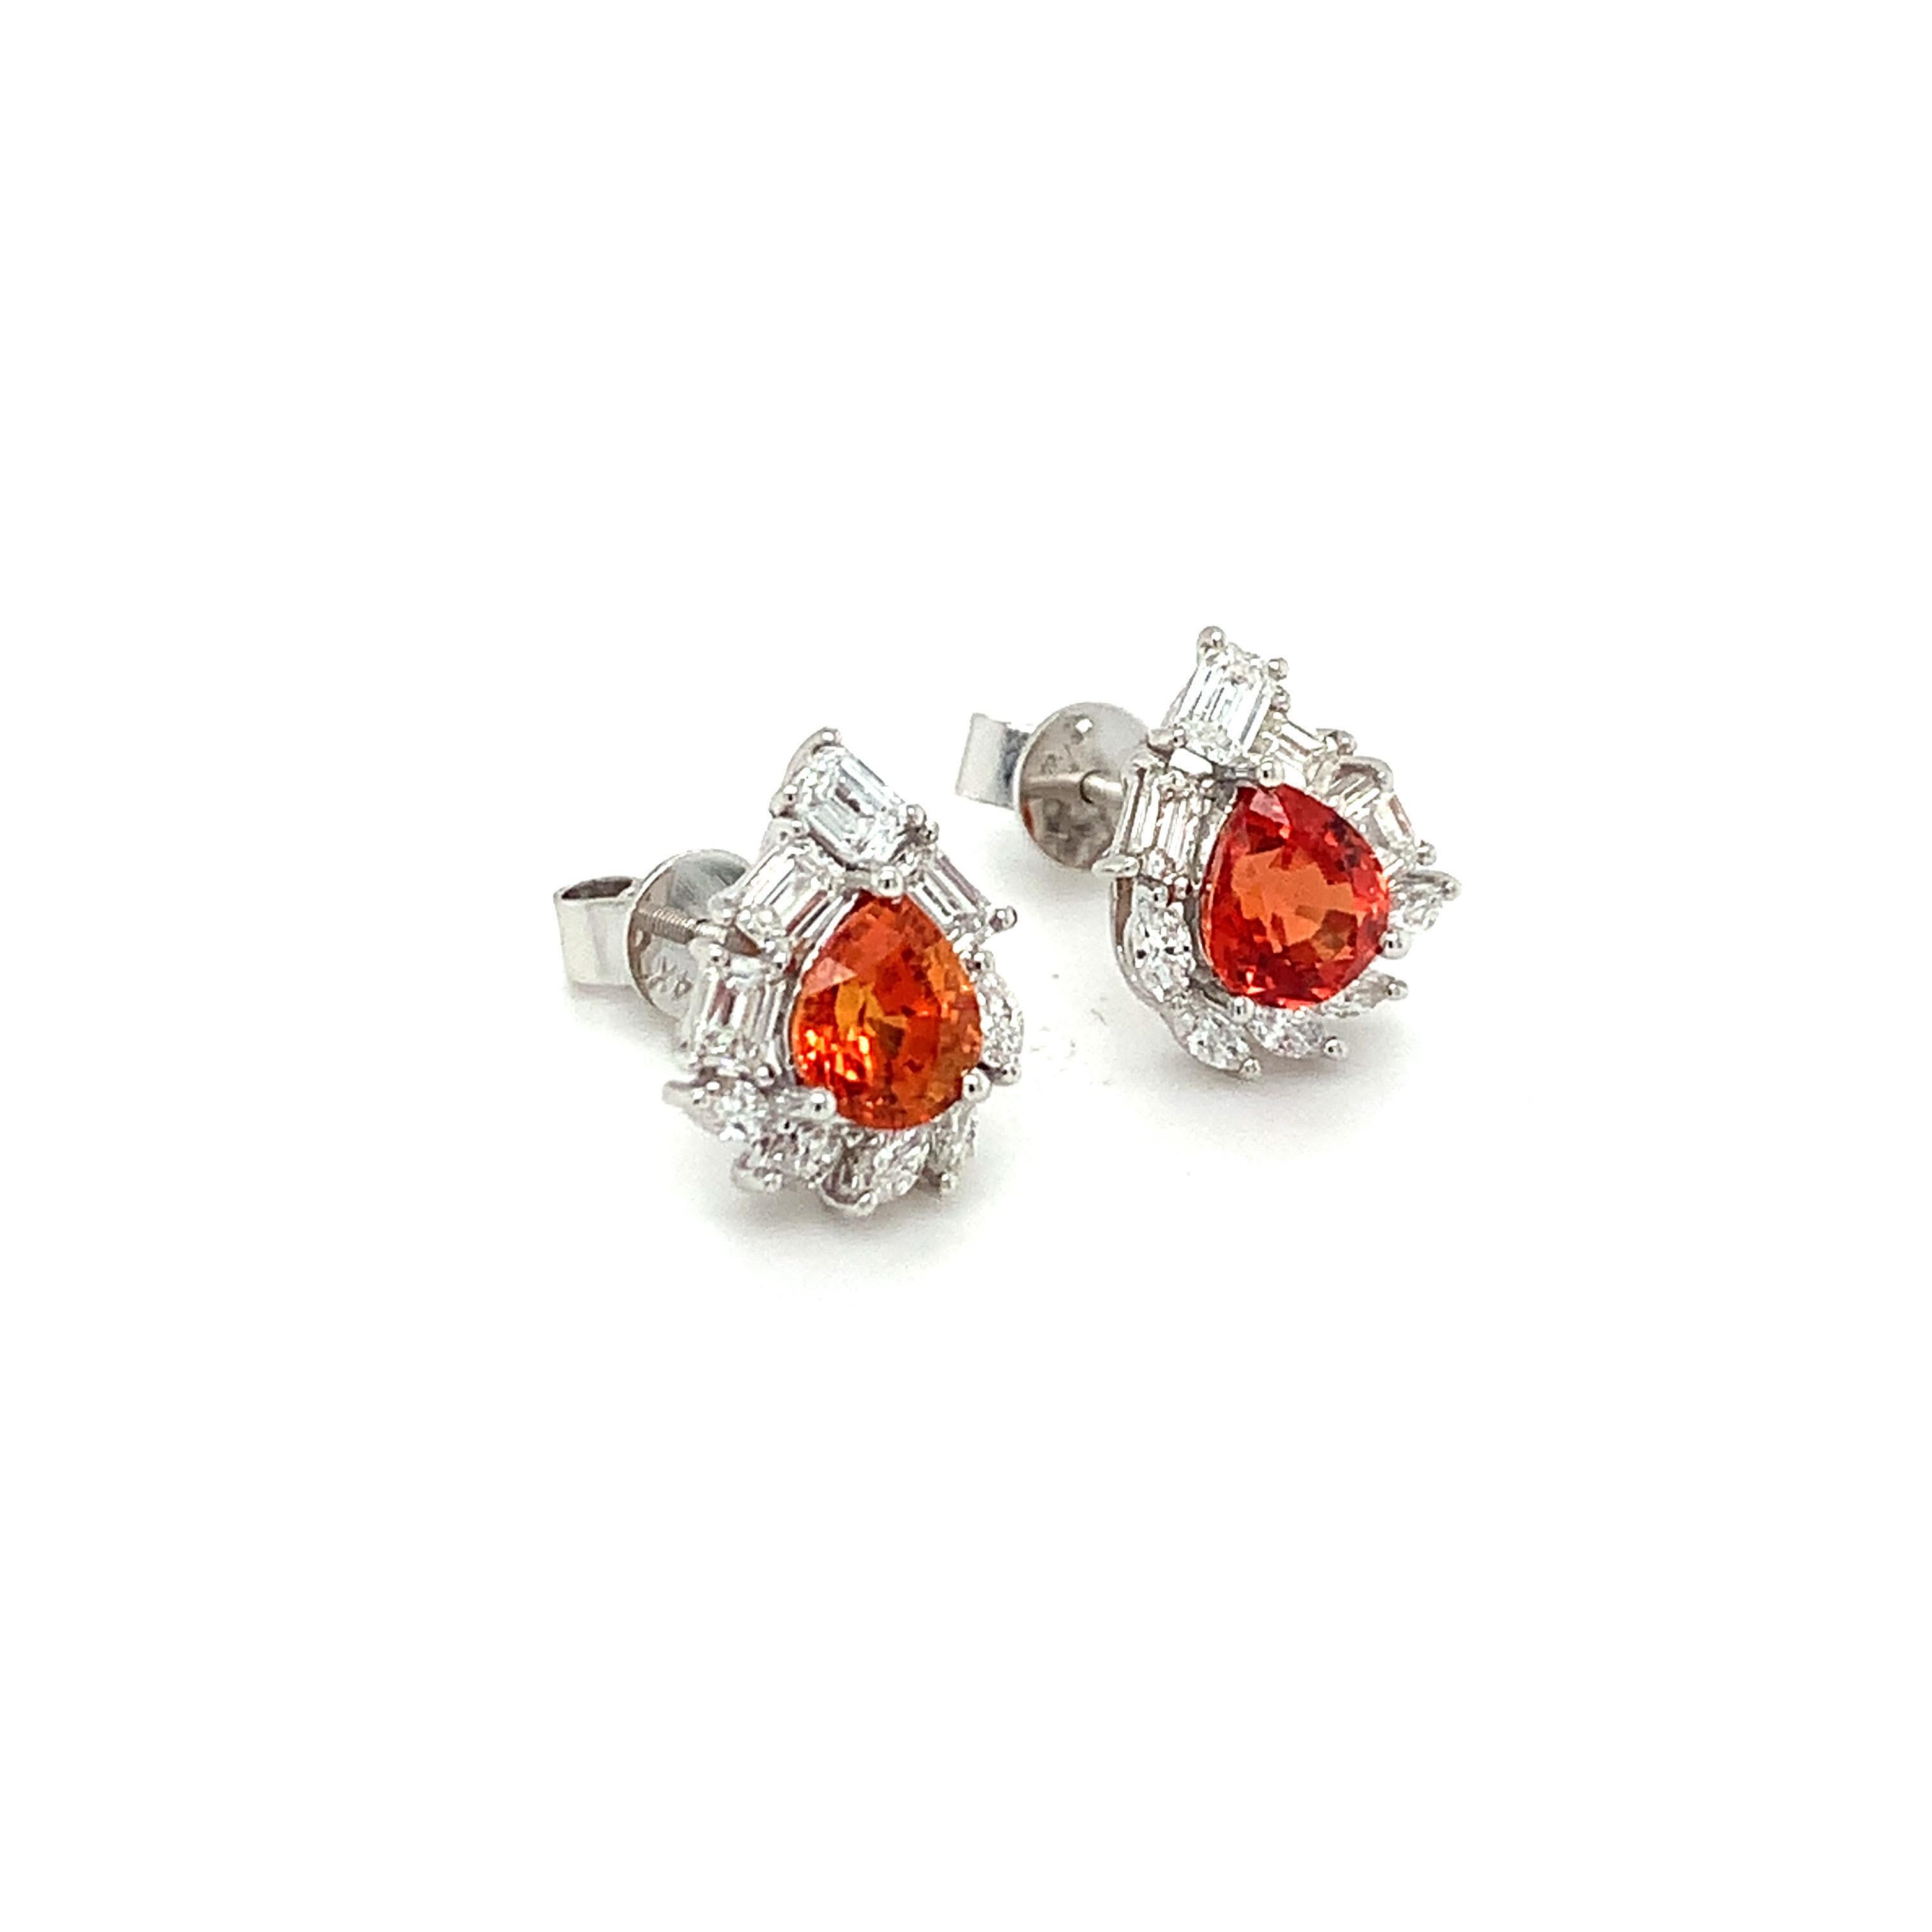 Gorgeous 14K white gold earrings feature a pear shaped natural orange sapphire in each center. Baguette and marquise cut white diamonds surround each center stone making it a stunning piece. The studs secure with screw backs.
Orange Sapphire: 2.18